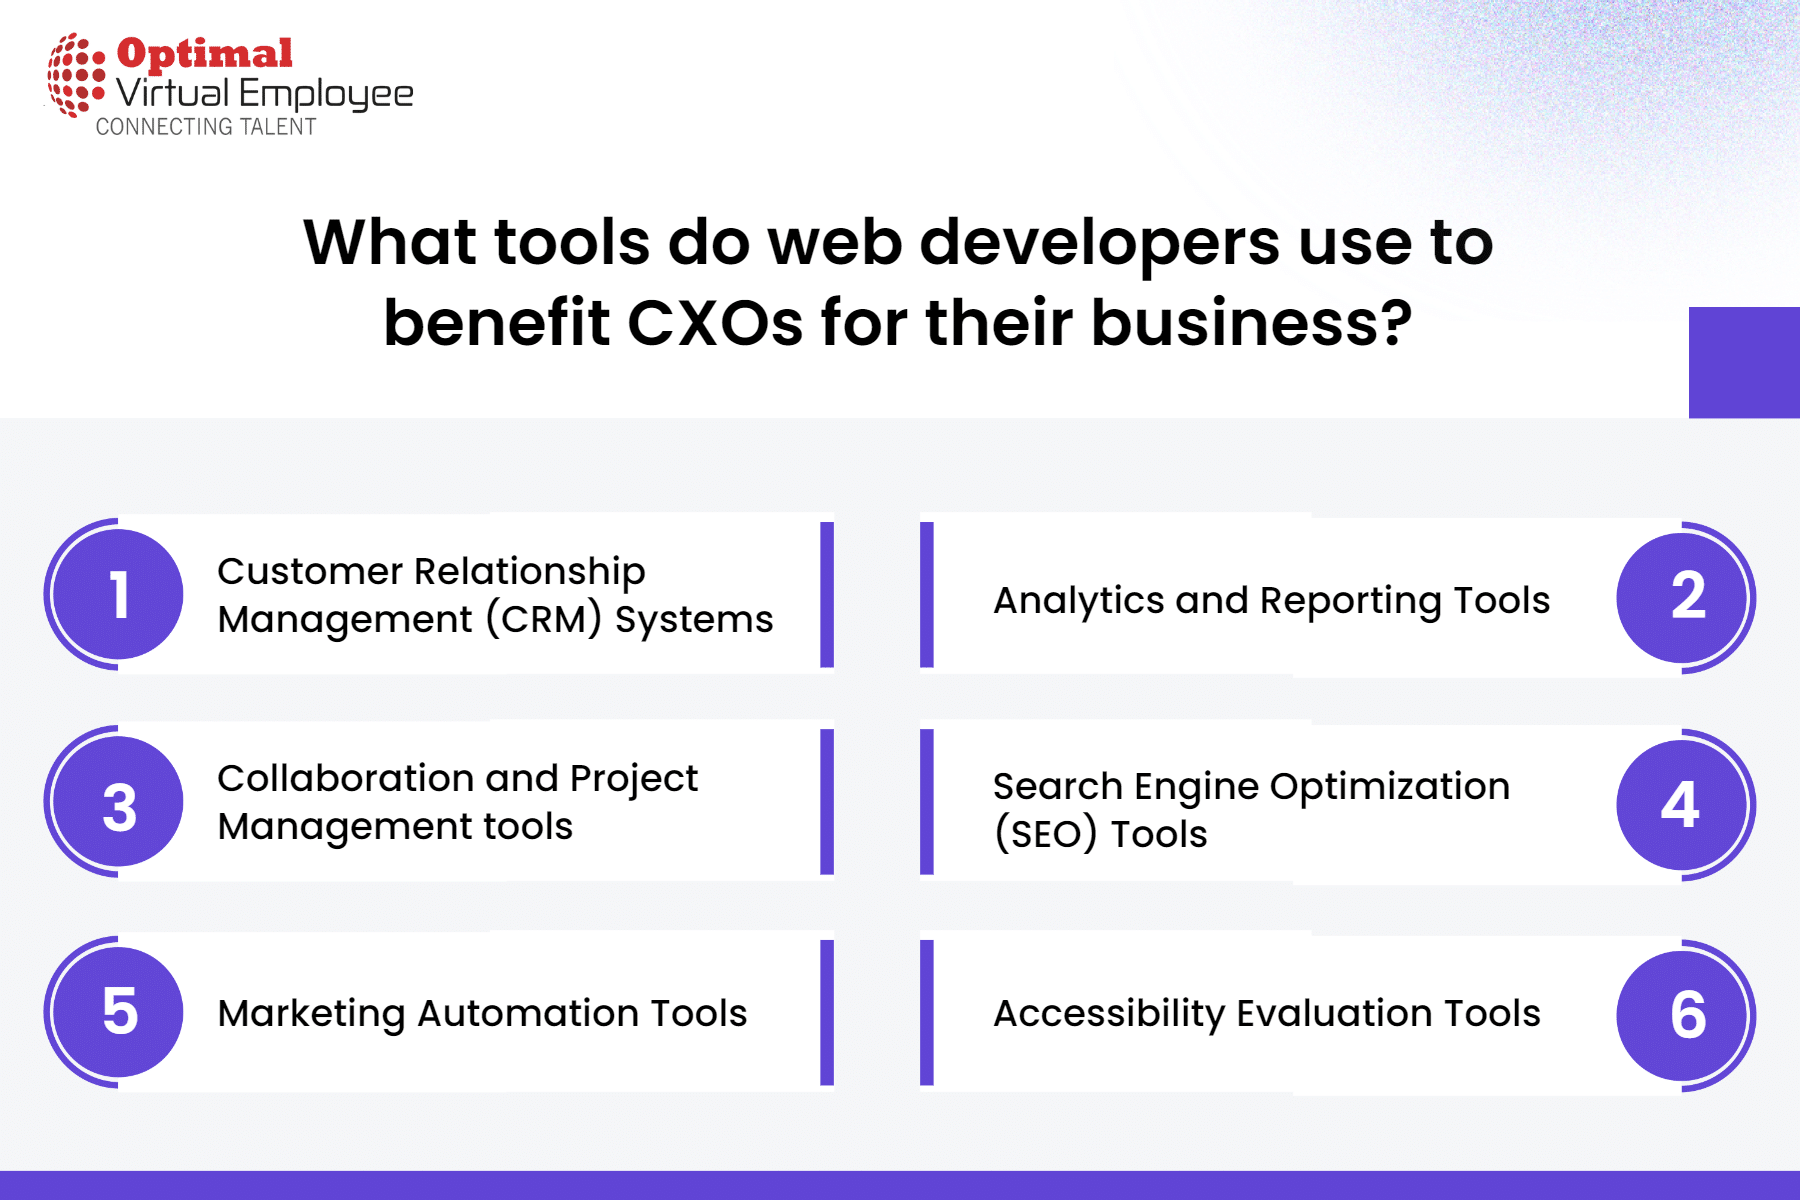 What tools do web developers use to benefit CXOs for their business